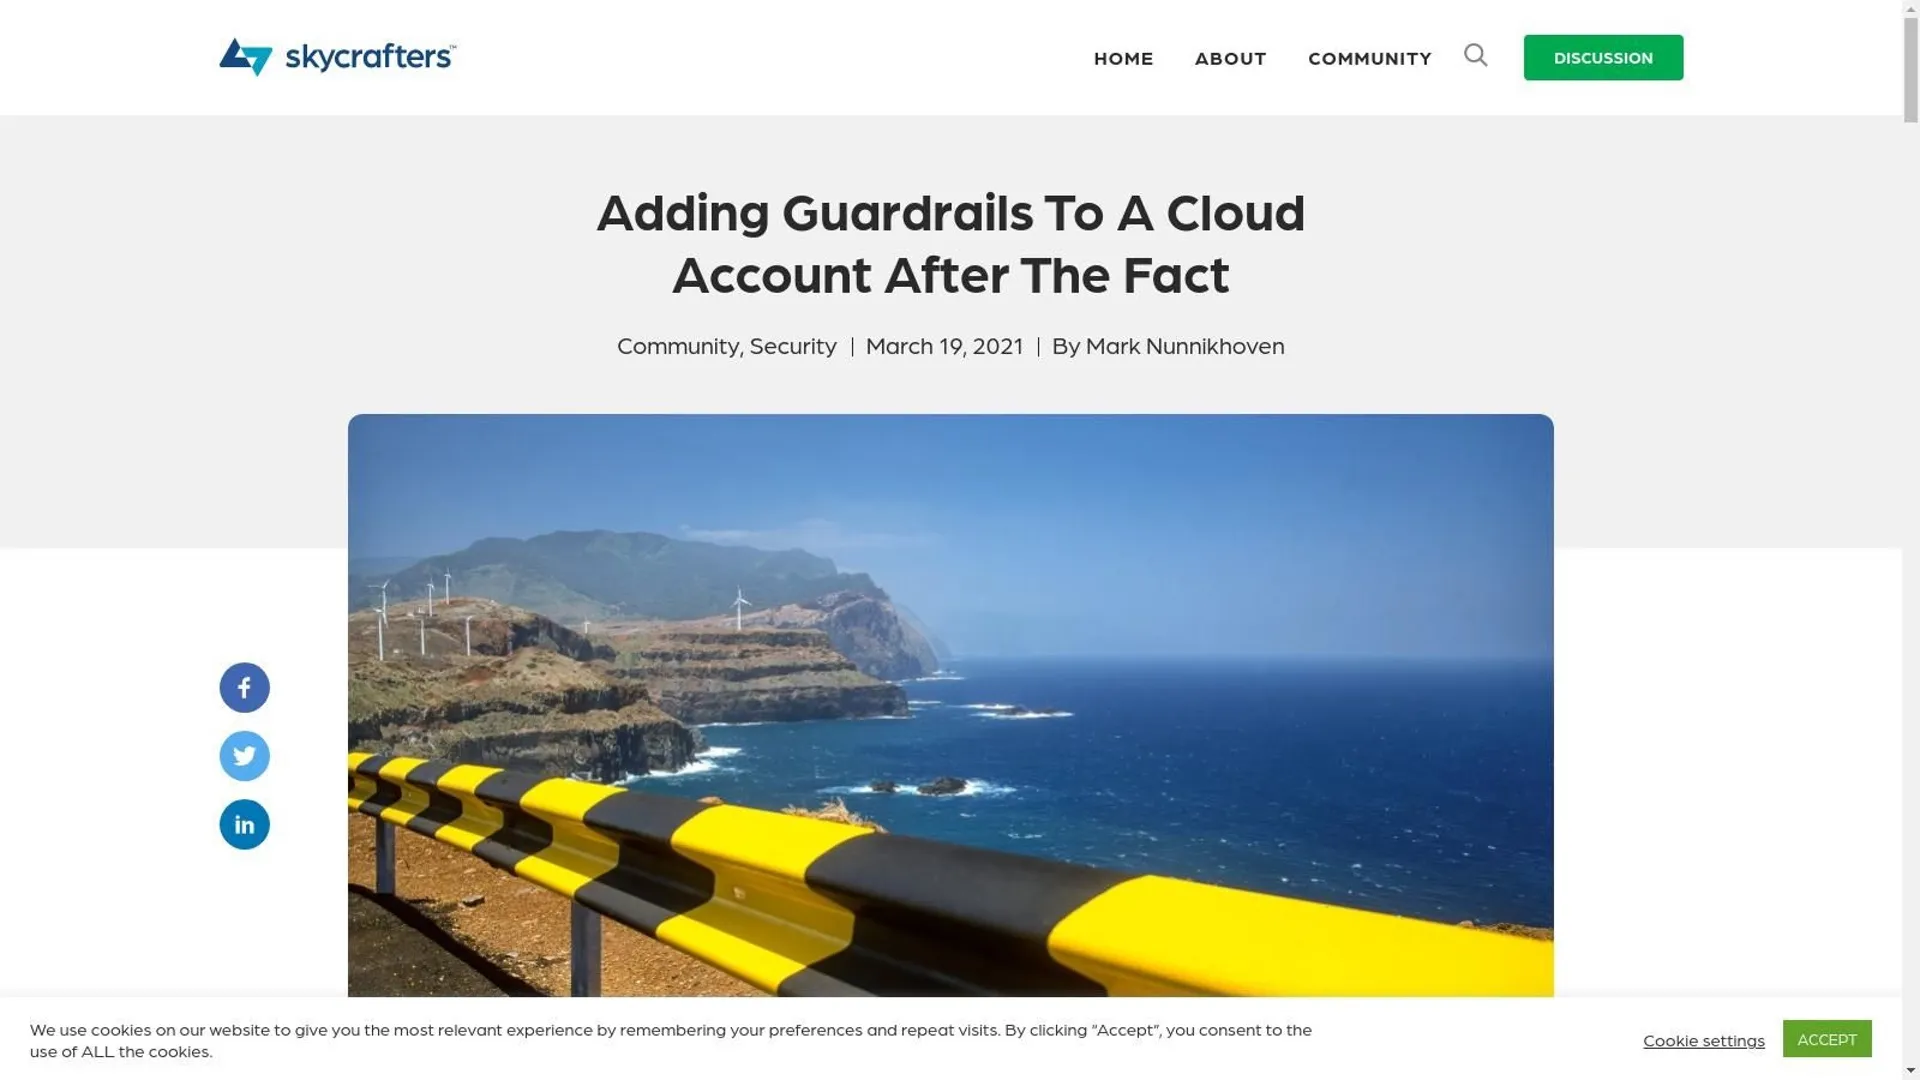 Adding Guardrails To A Cloud Account After The Fact